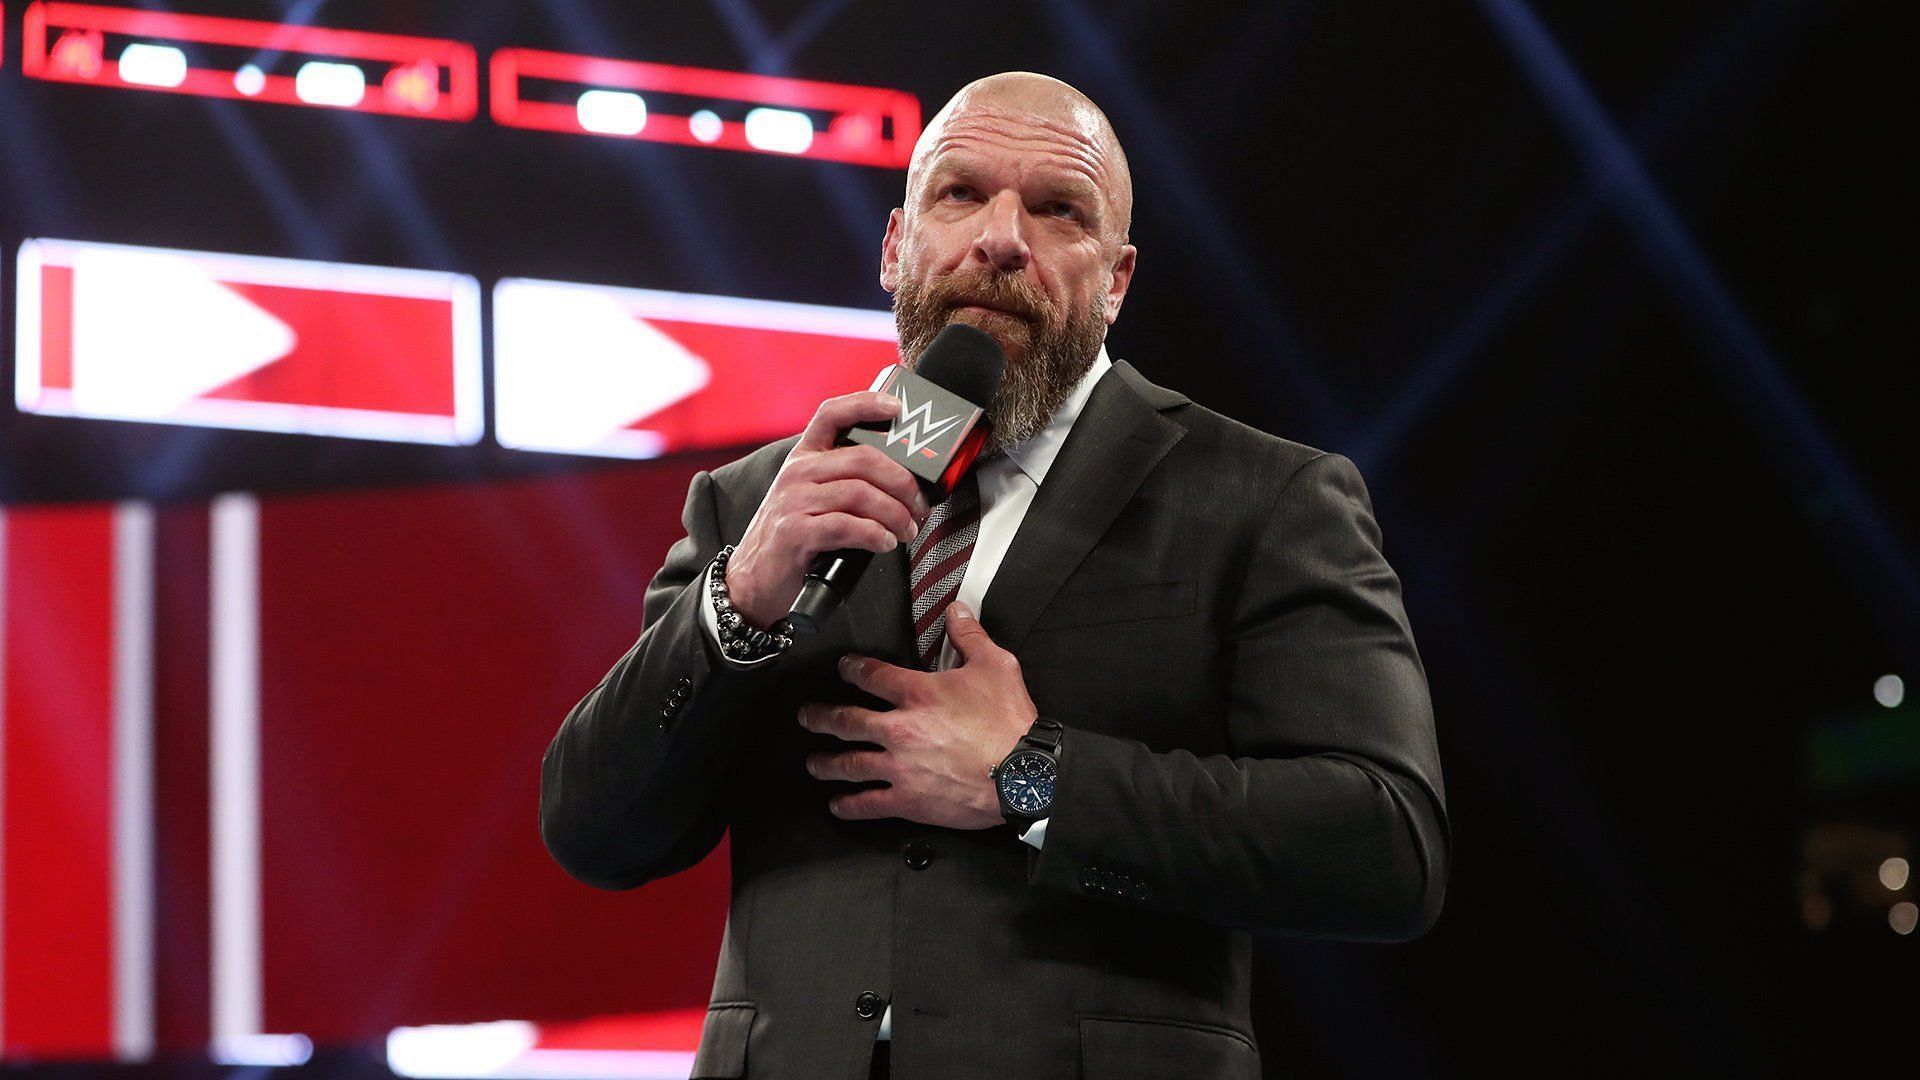 HHH has brought about some big changes since assuming power.